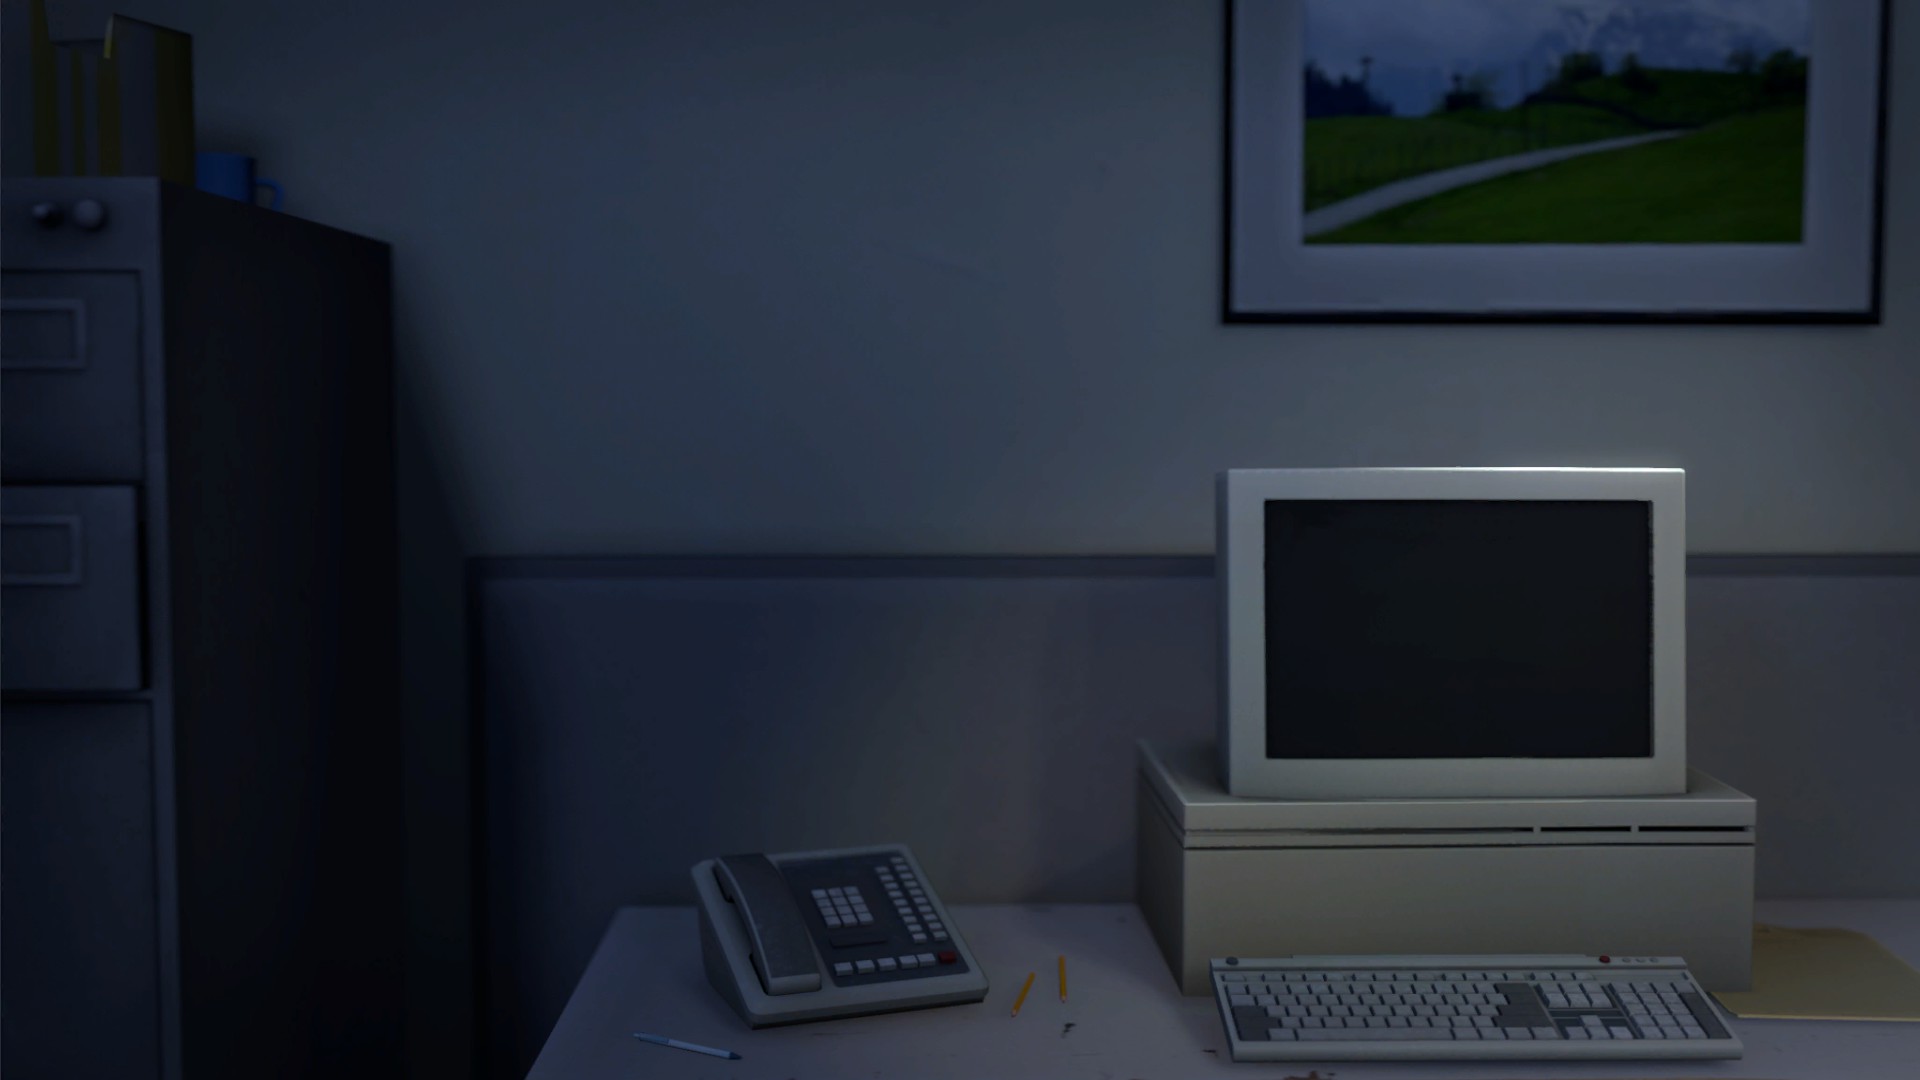 stanley parable free